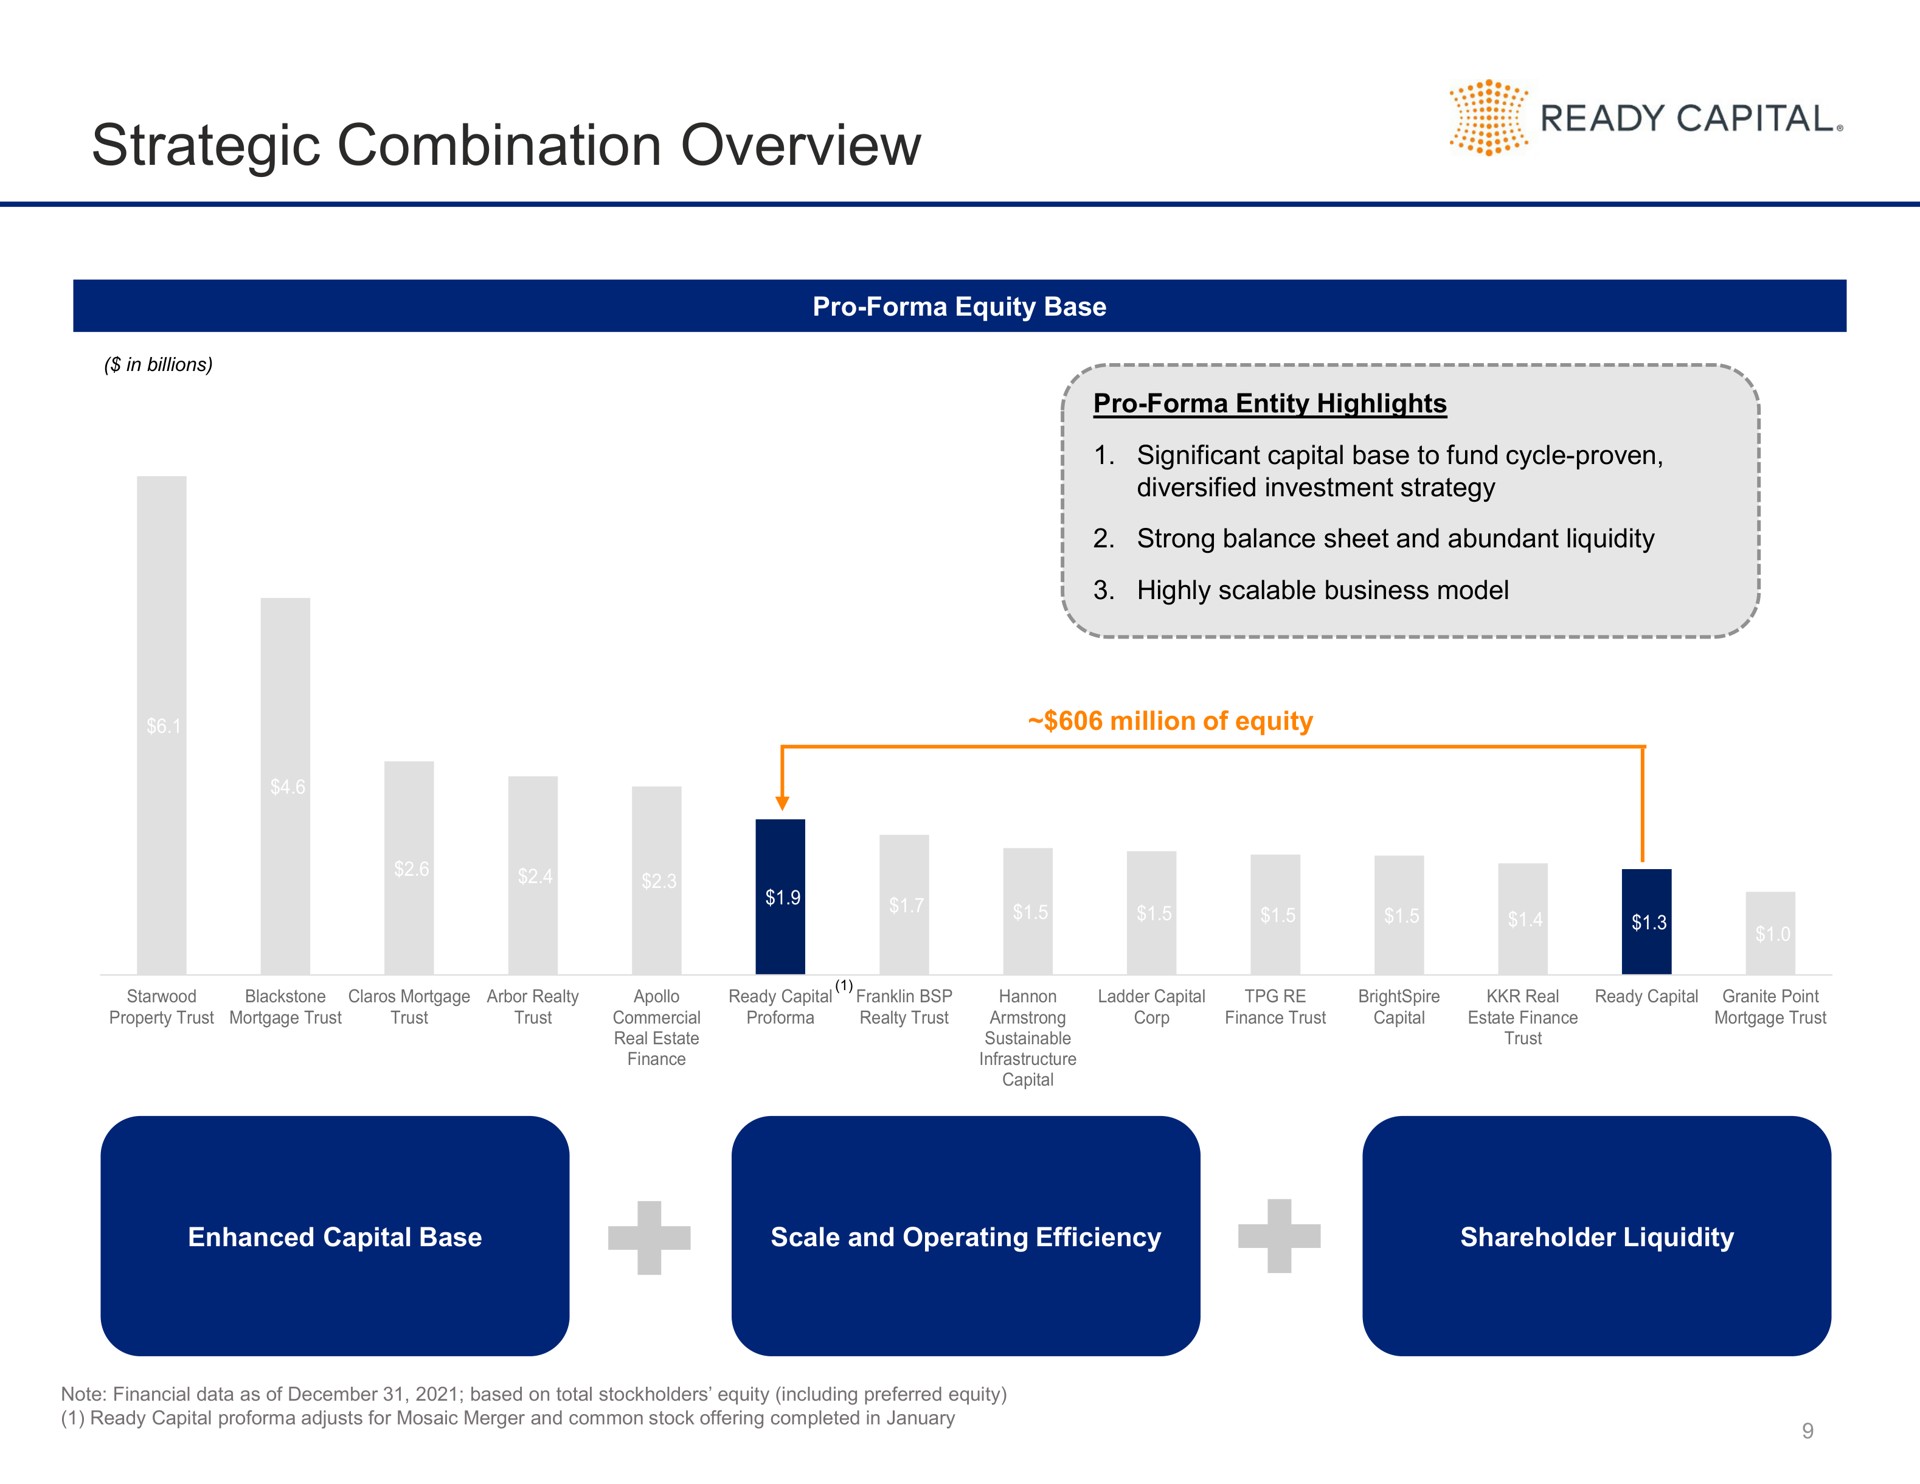 strategic combination overview see ready capital | Ready Capital